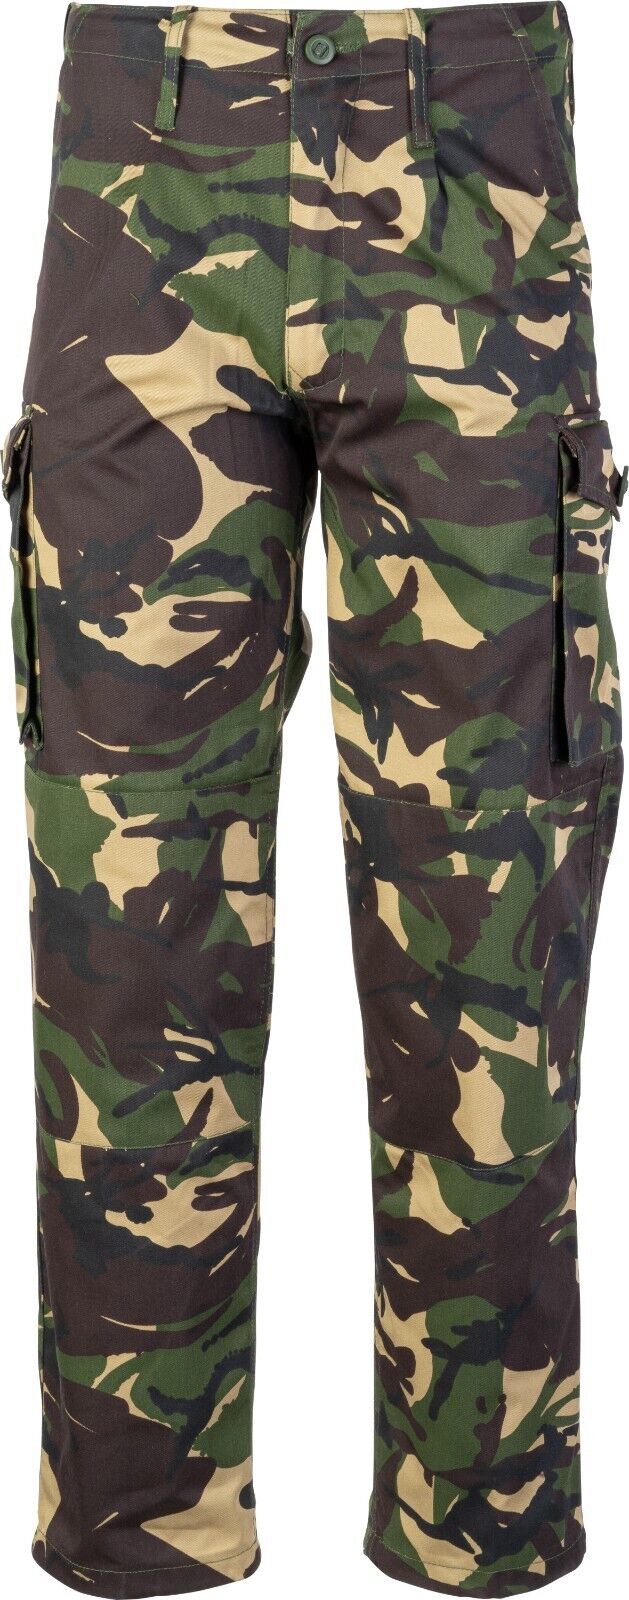 MIL-COM MENS ARMY SOLDIER 95 TROUSERS 28-48 INCH S95 DPM Camo AIRSOFT WORKWEAR